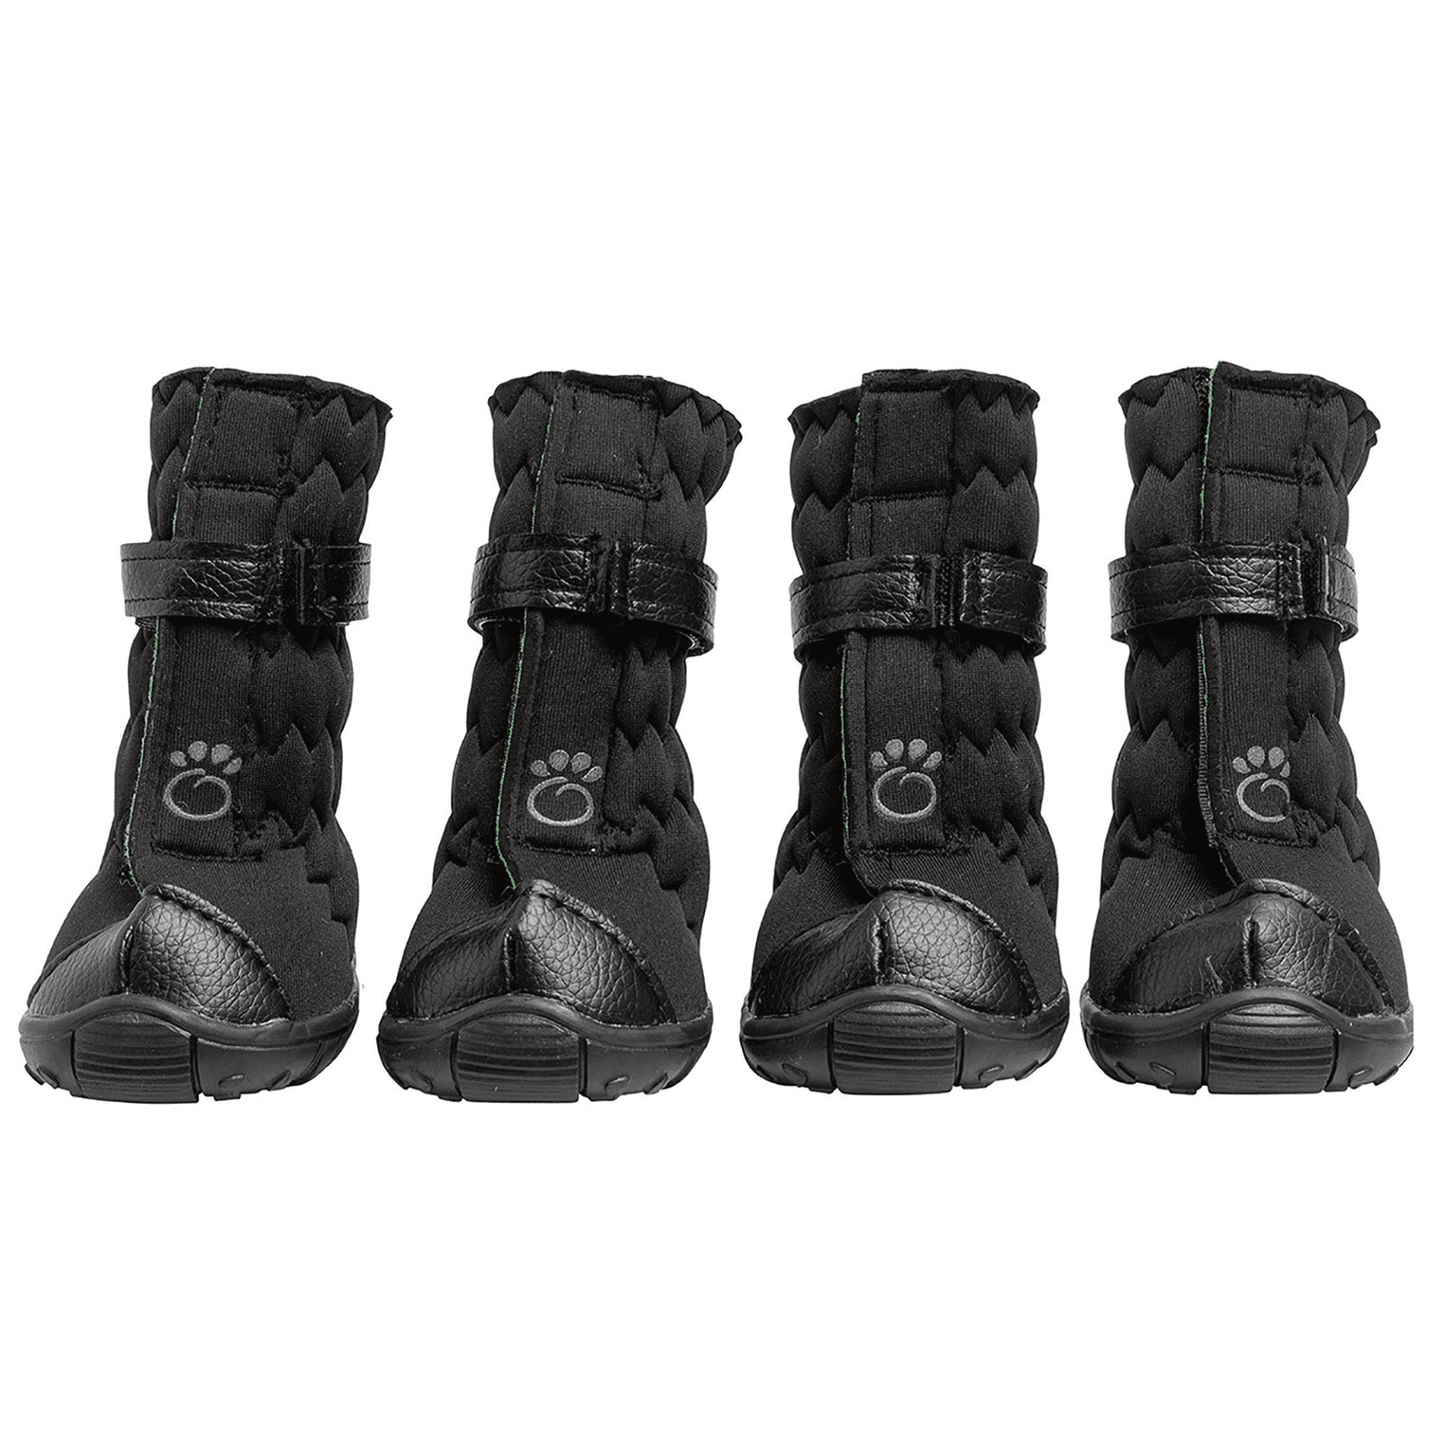 Elasto-Fit Dog Boots - Black - Winter Traction Control